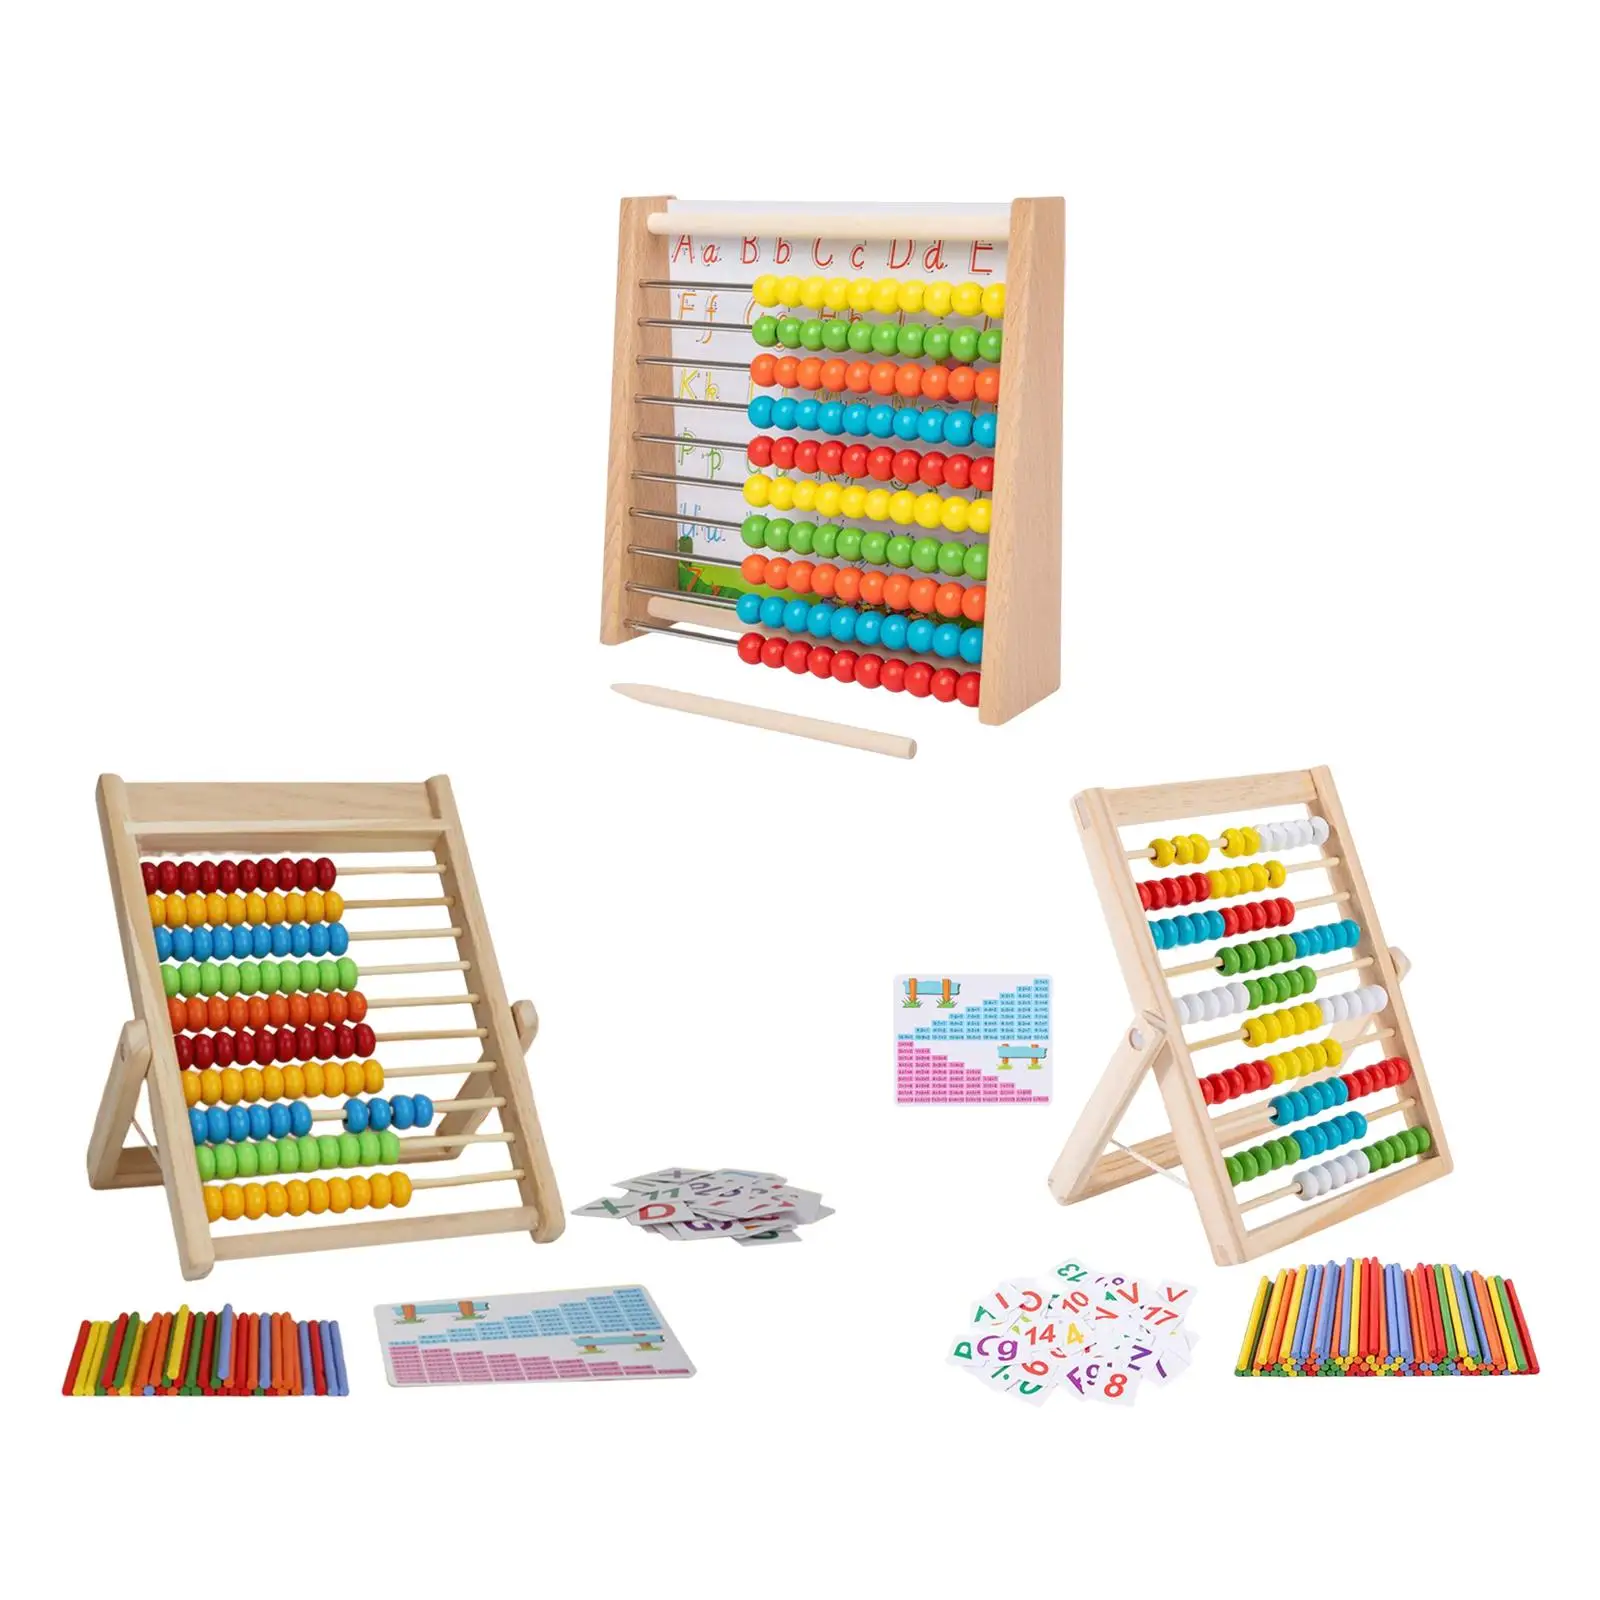 Wooden Abacus Educational Counting Frames Toy for Children Holiday Gifts